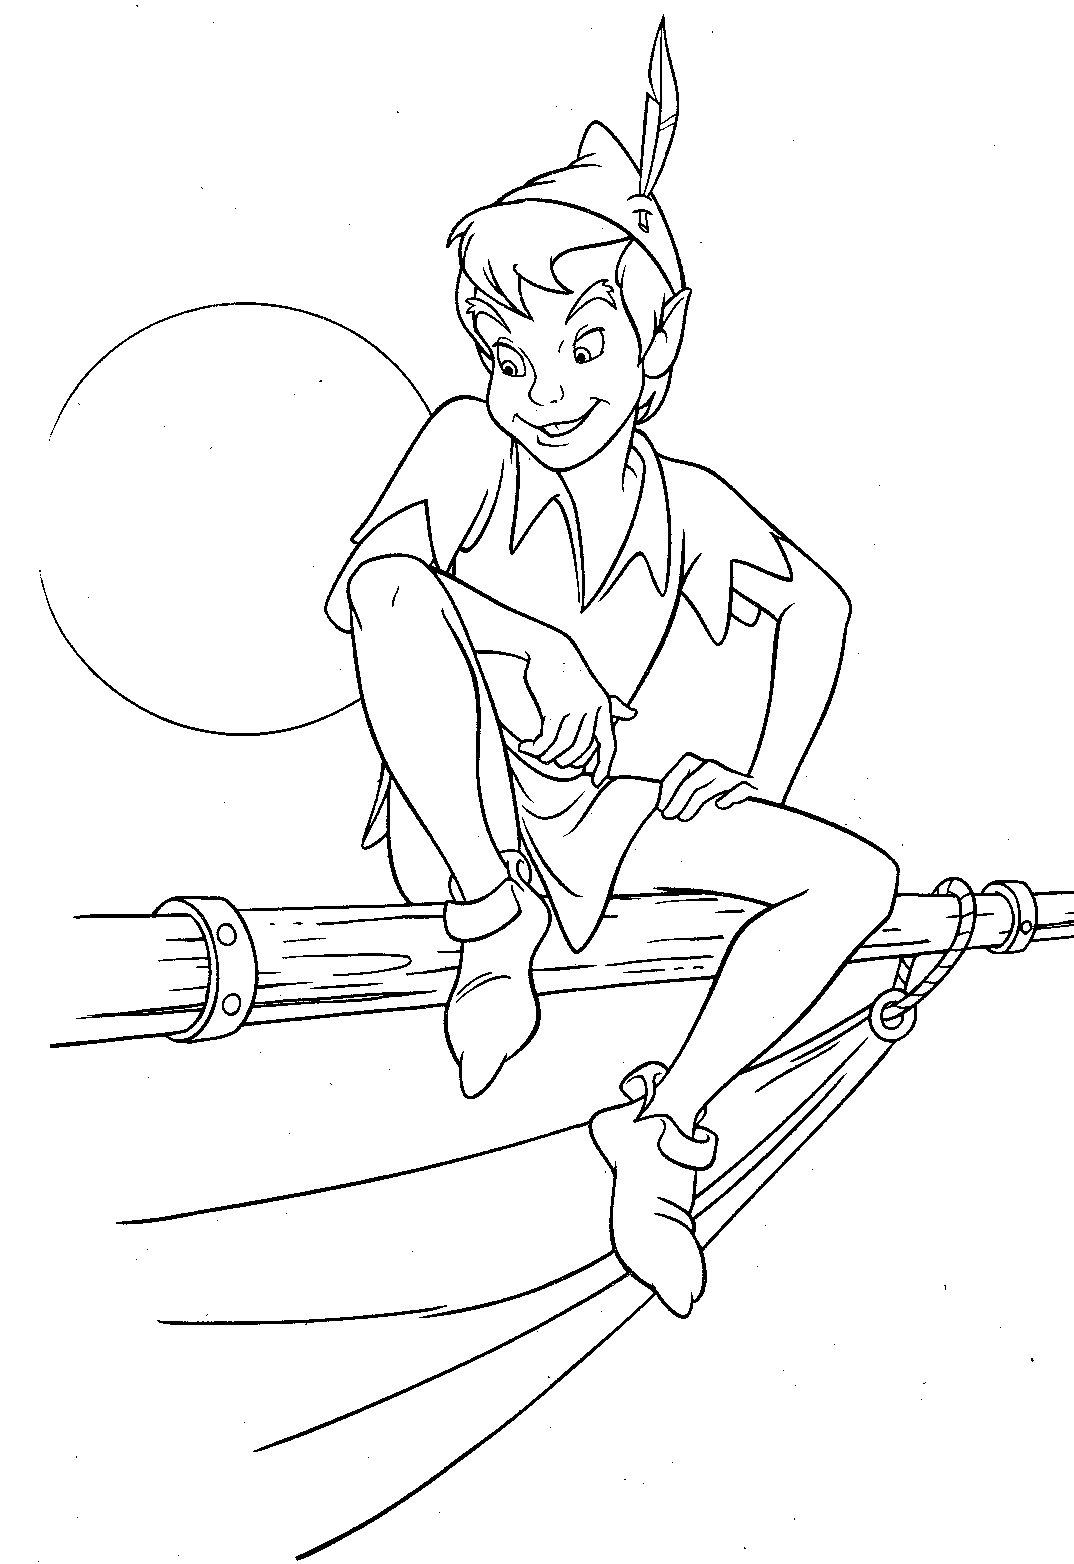 Peter Pan picture to print and color